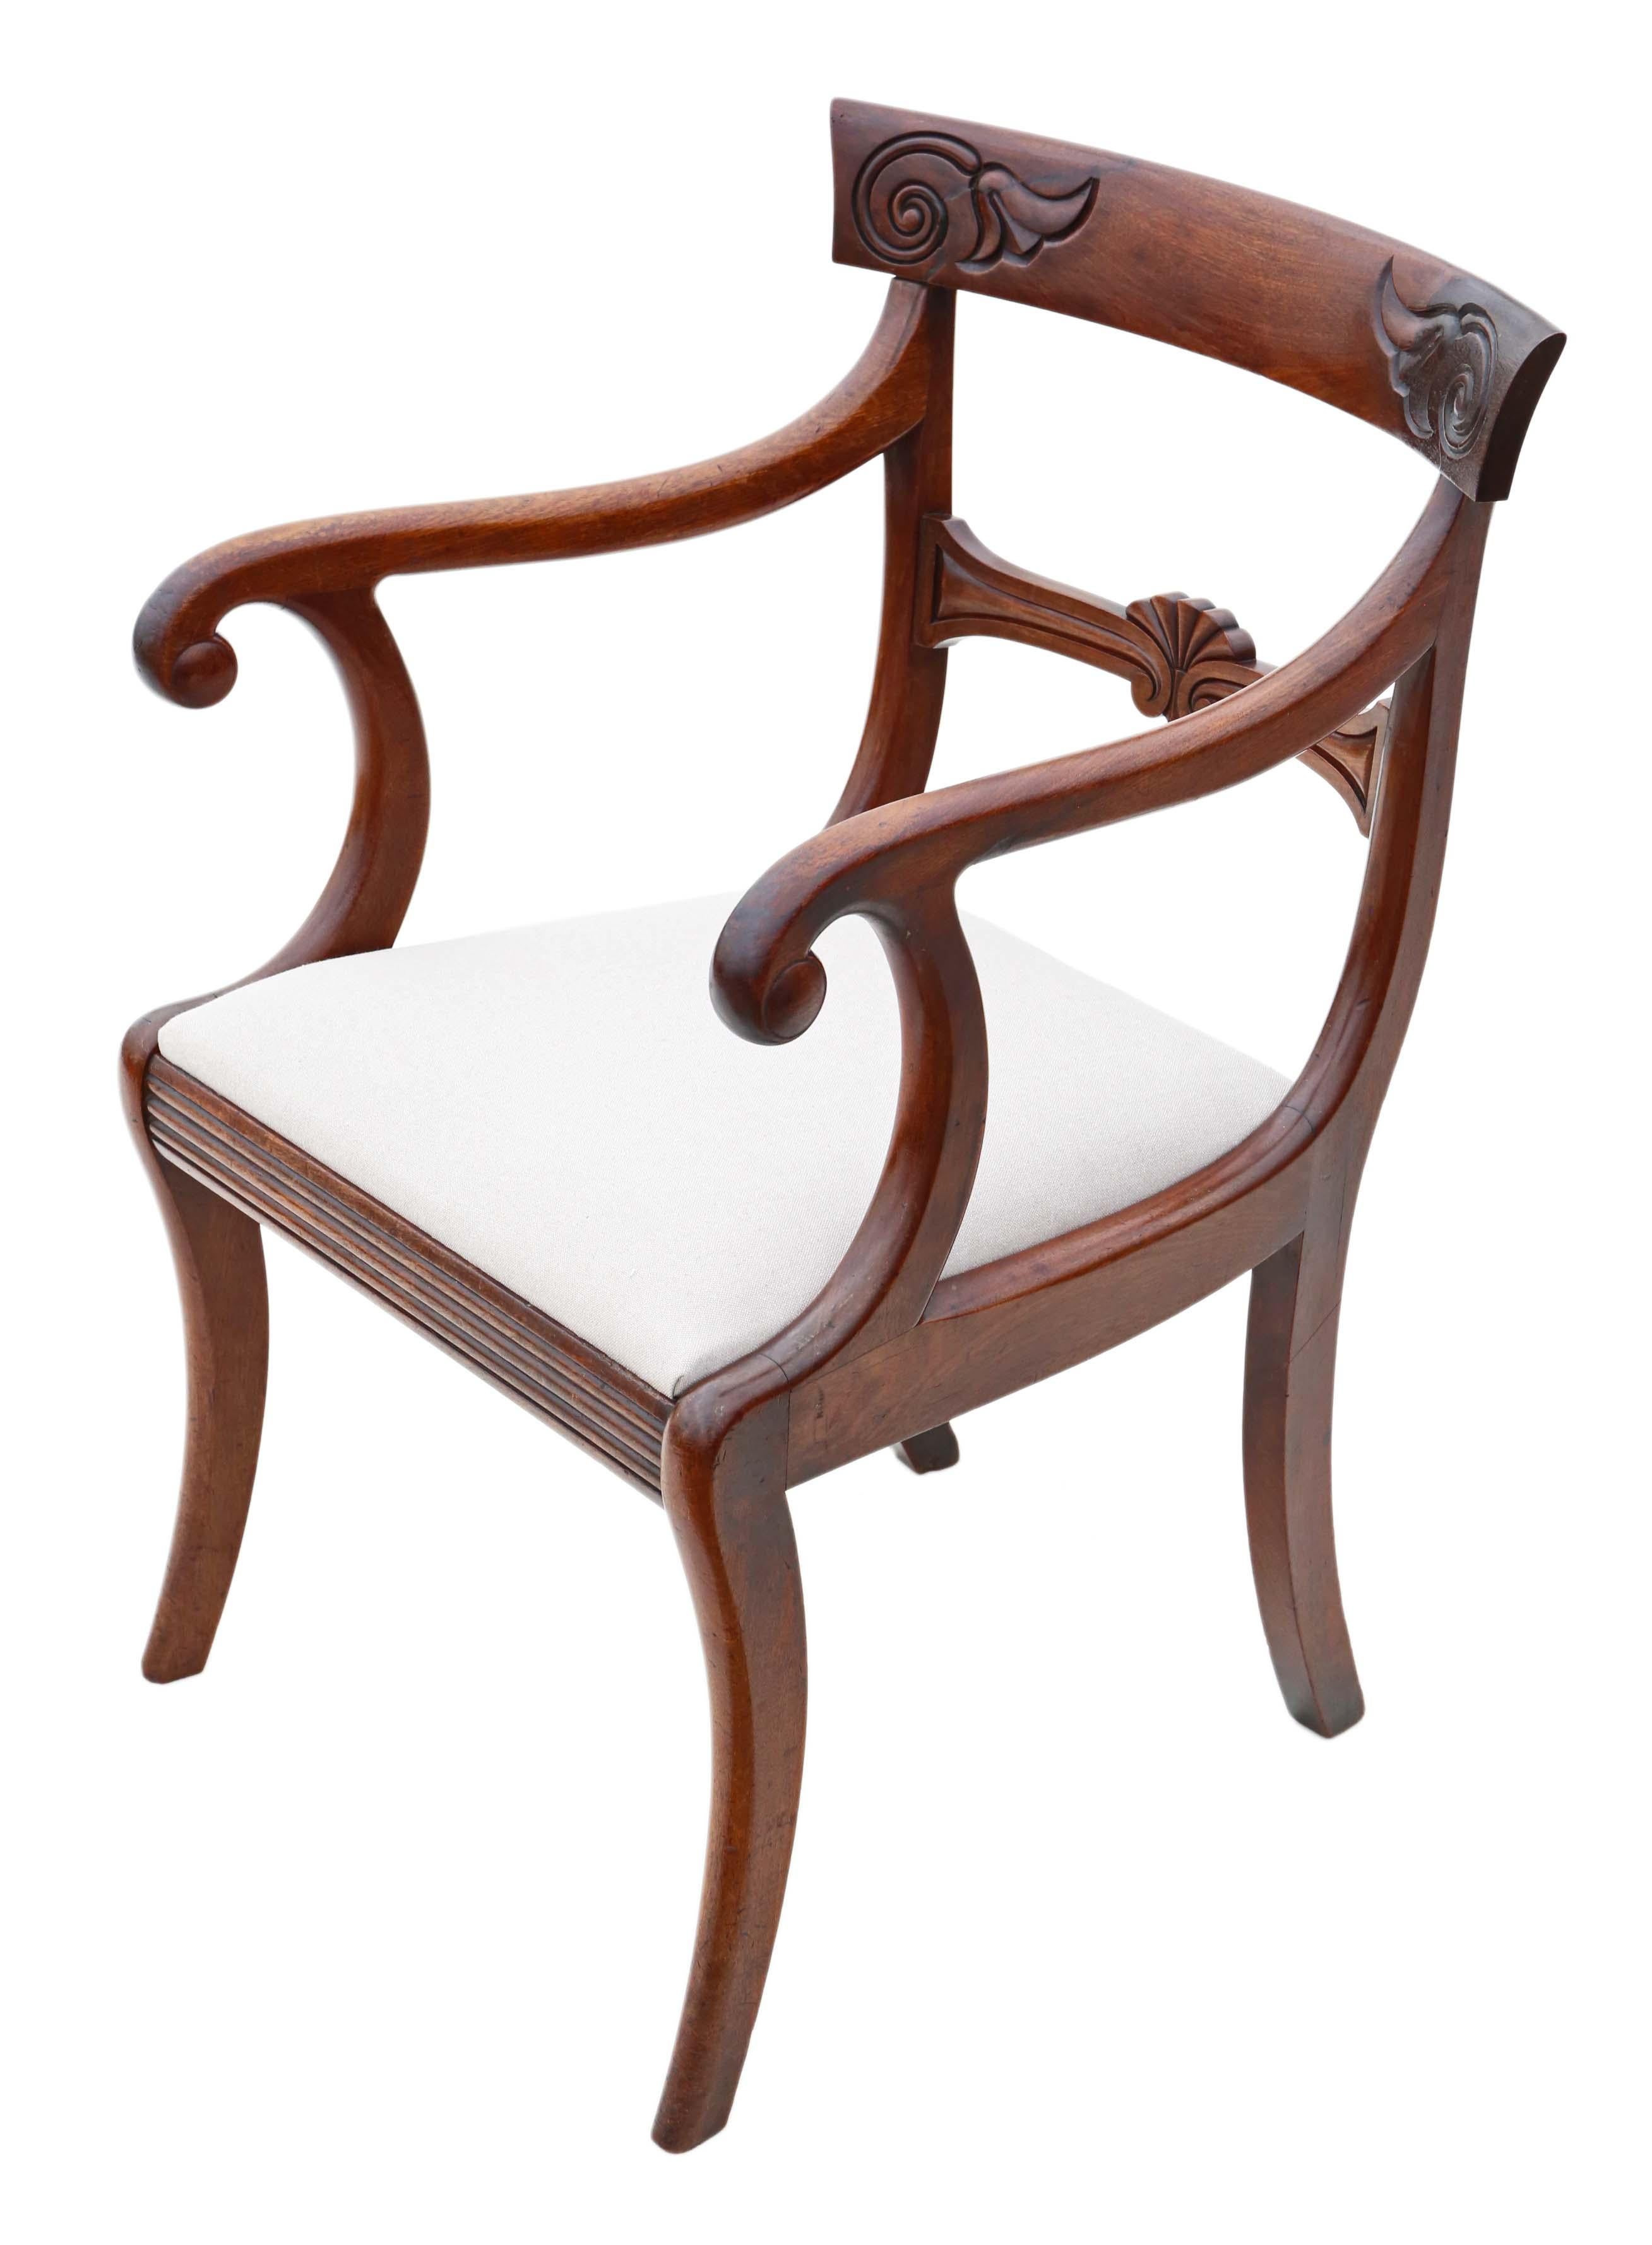 Wood Regency Cuban Mahogany Dining Chairs: Set of 6 (4+2), Antique Quality, C1825 For Sale